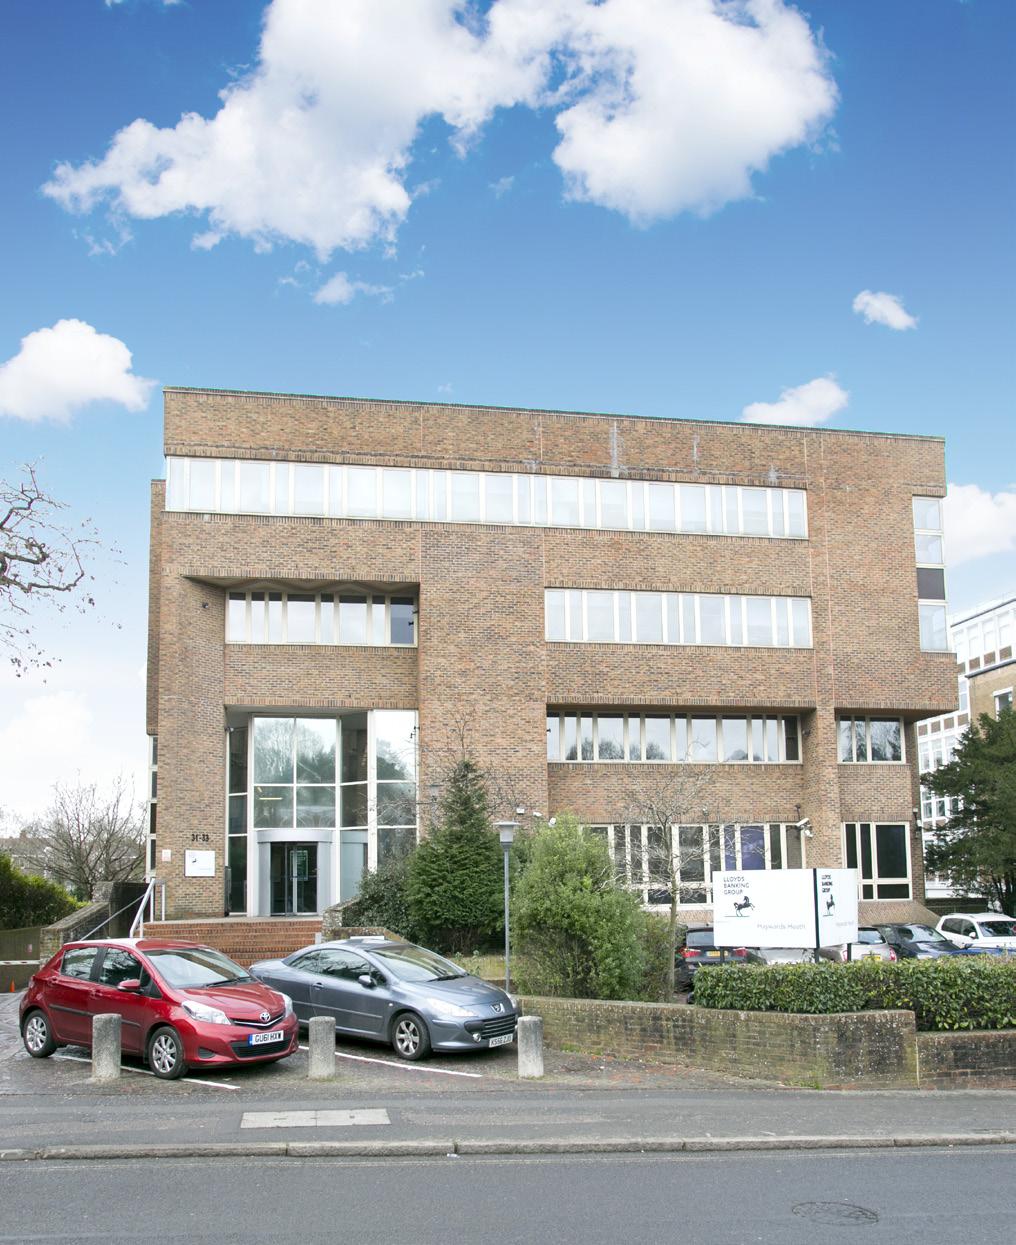 Office investment located in an affluent South East town Investment Summary Office investment totalling 30,055 sq ft located in the affluent South East Market Town of Haywards Heath.